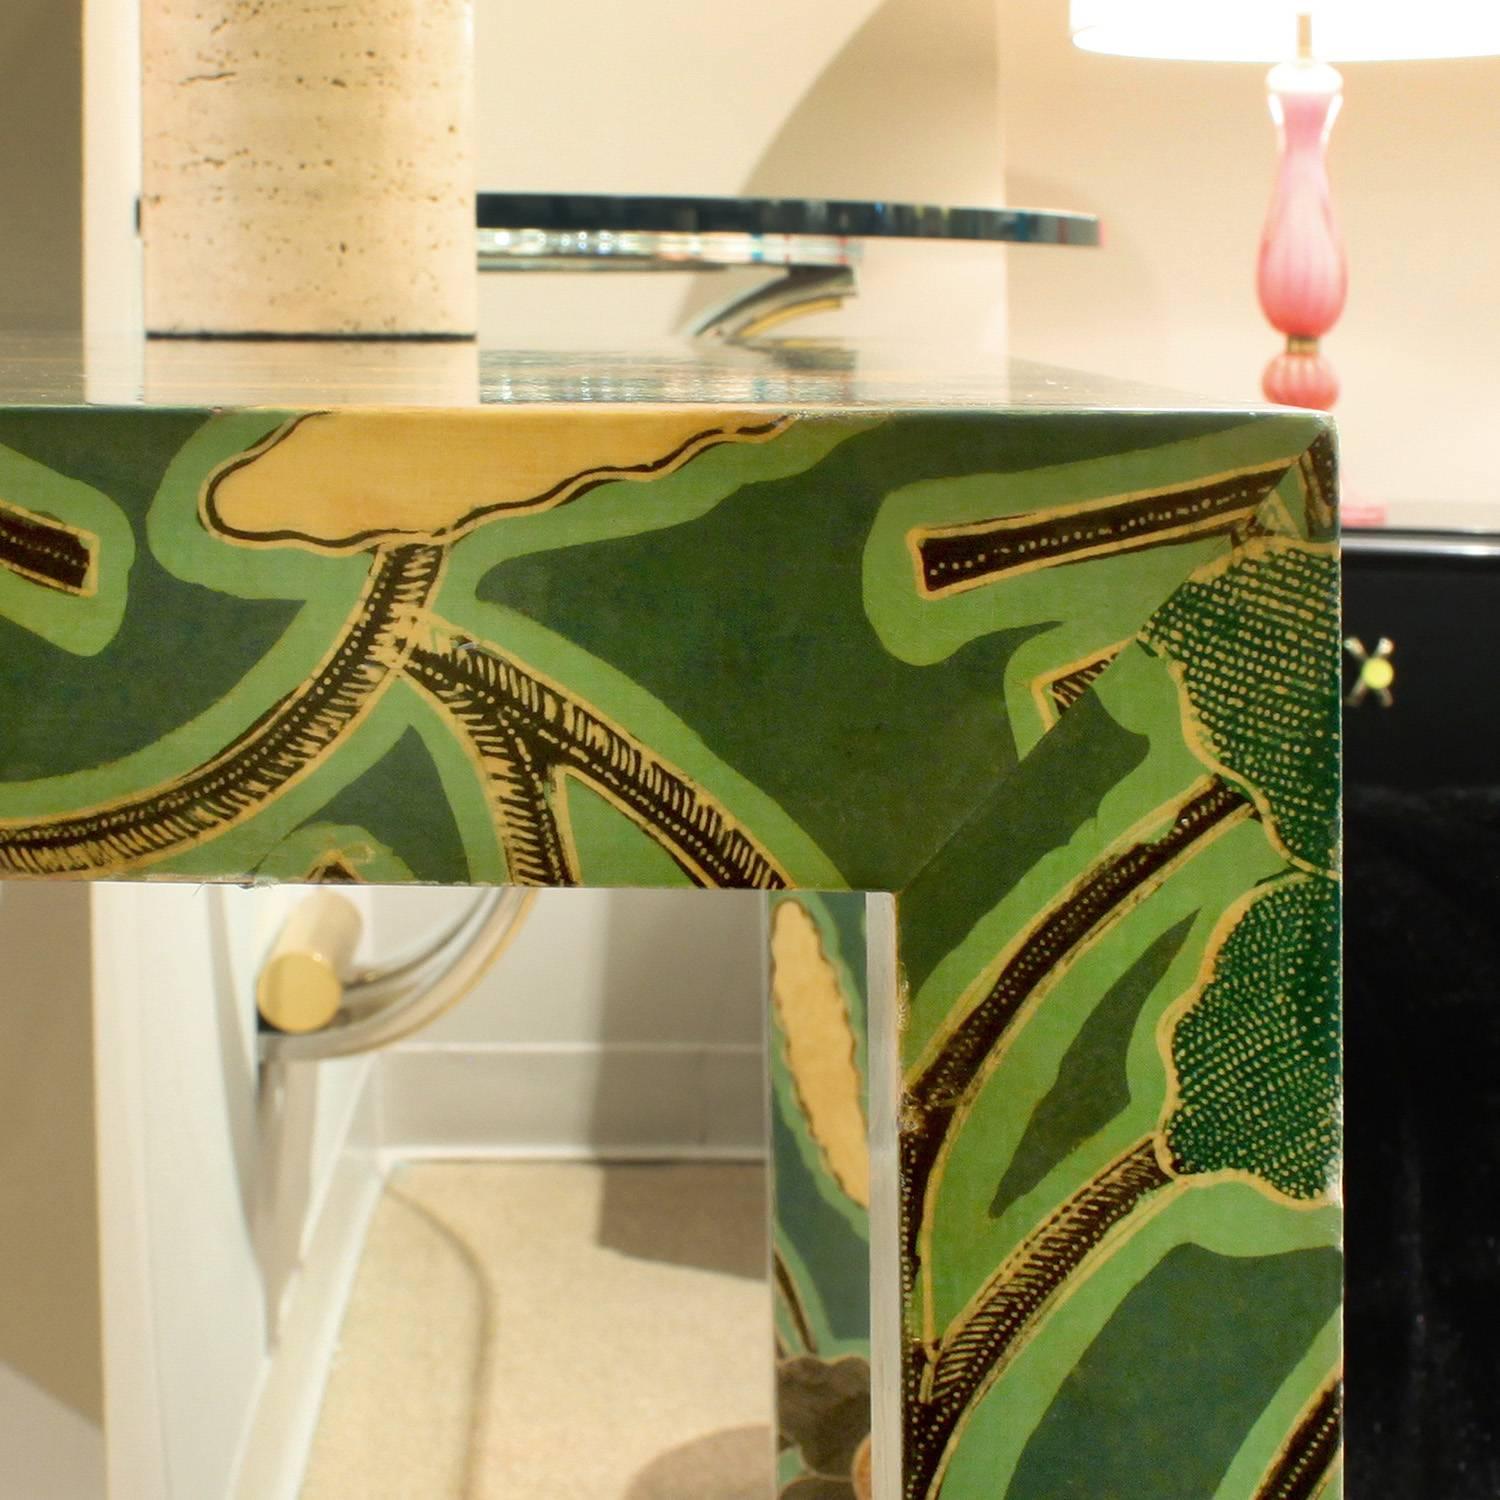 Game table clad in lacquered floral batik by Karl Springer, American, 1970s. This is an early example of his work.